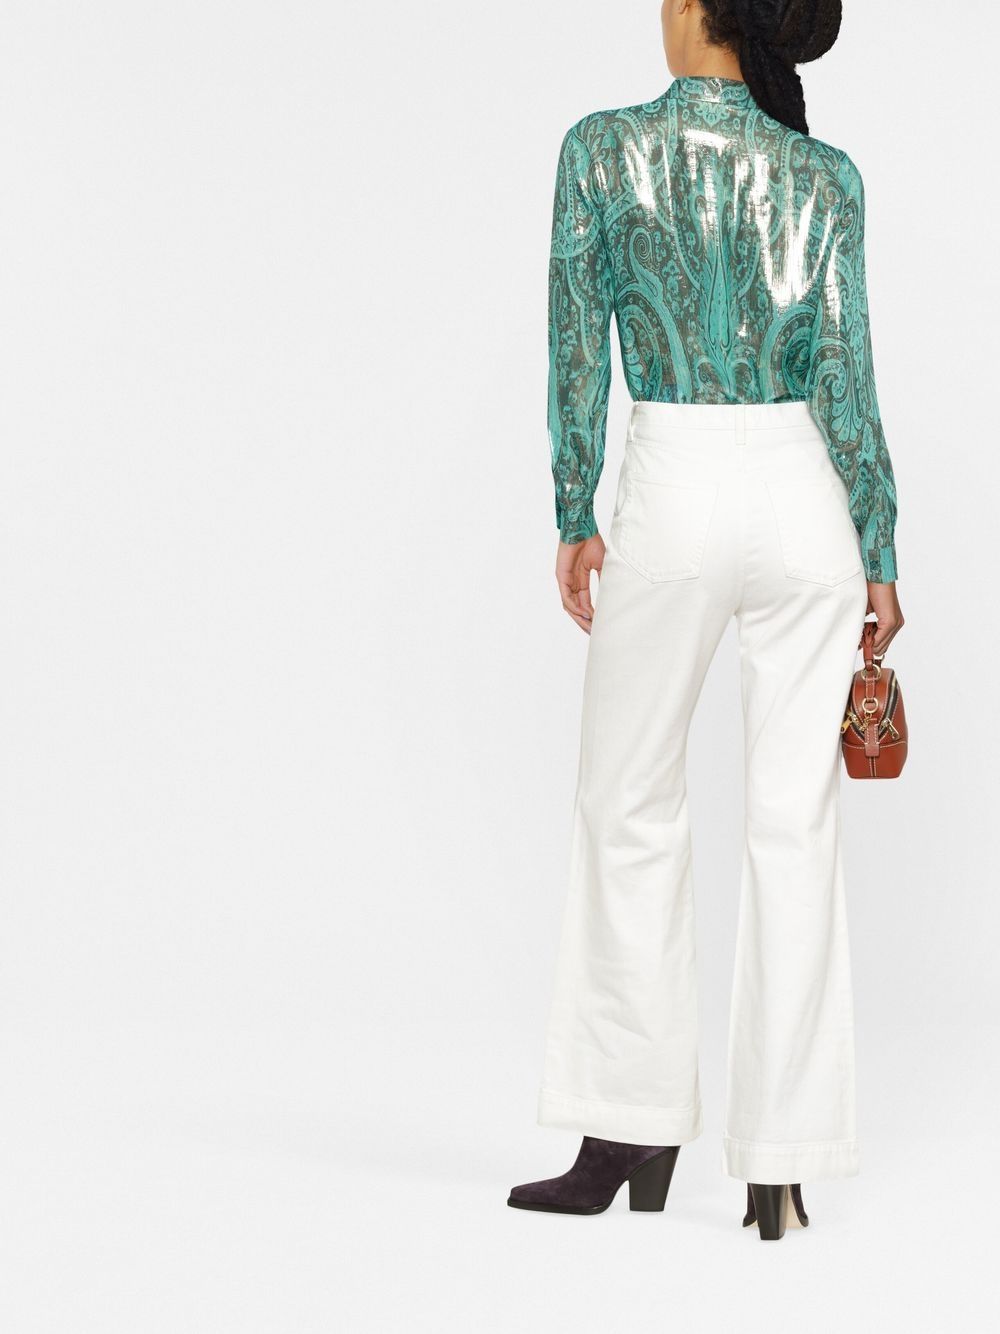 Paisley print silk trousers in purple and mint green